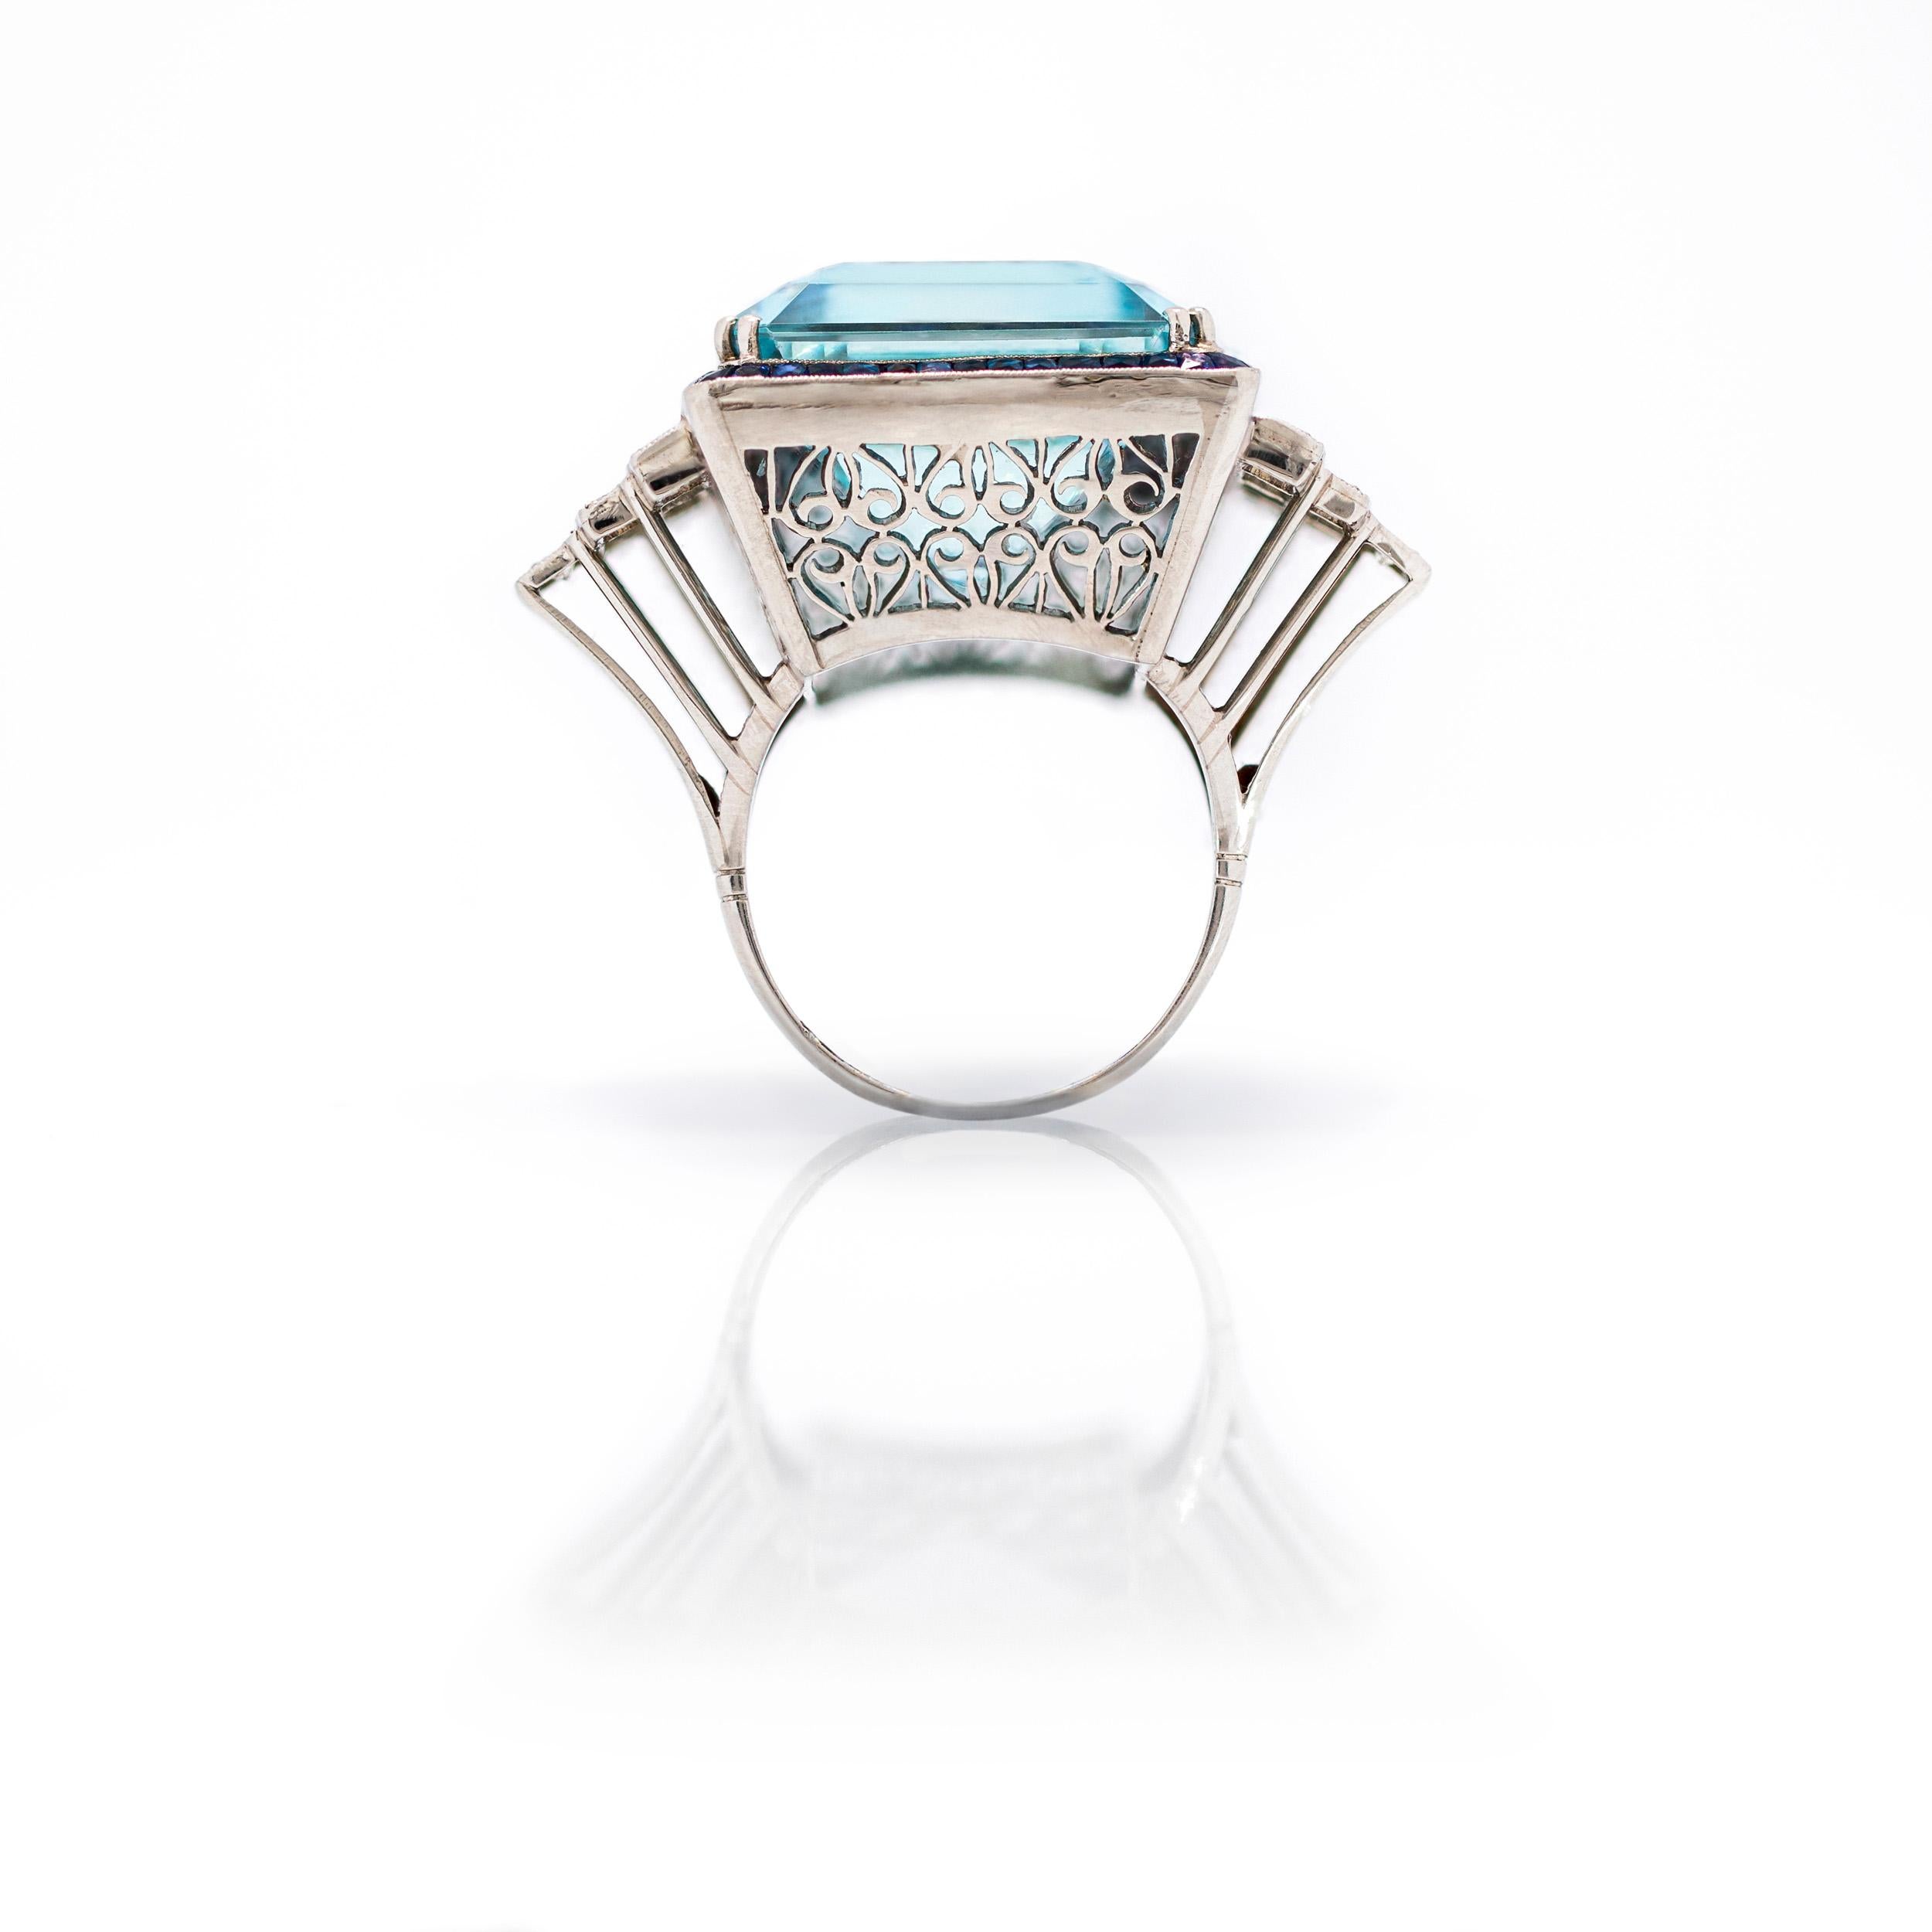 Impressive Emerald Cut Aquamarine surrounded by French Cut Sapphires and Diamond Ring

Eleanor is named for Former First Lady Eleanor Rosevelt, who received a stunning 1,298 Carat Aquamarine from President Vargas of Brazil in 1936. What a gift!